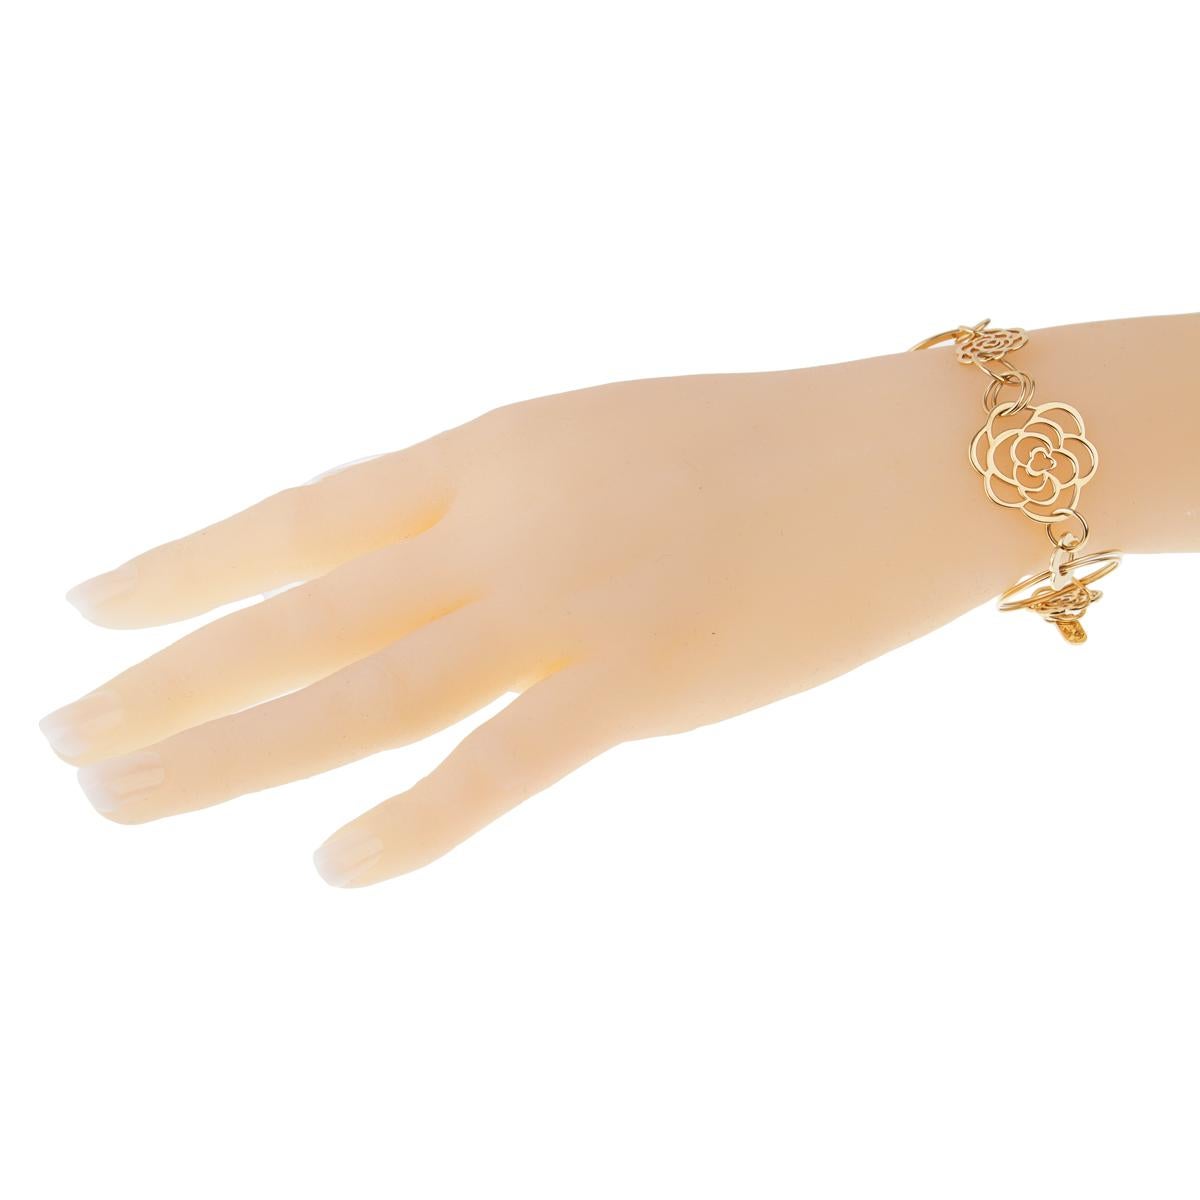 A exquisite and airy Chanel Camellia bracelet fashioned in different sized linked circles of Chanel 18k yellow gold, accompanied by intermittently placed yellow gold Chanel Camellia flowers. 

Length: 7